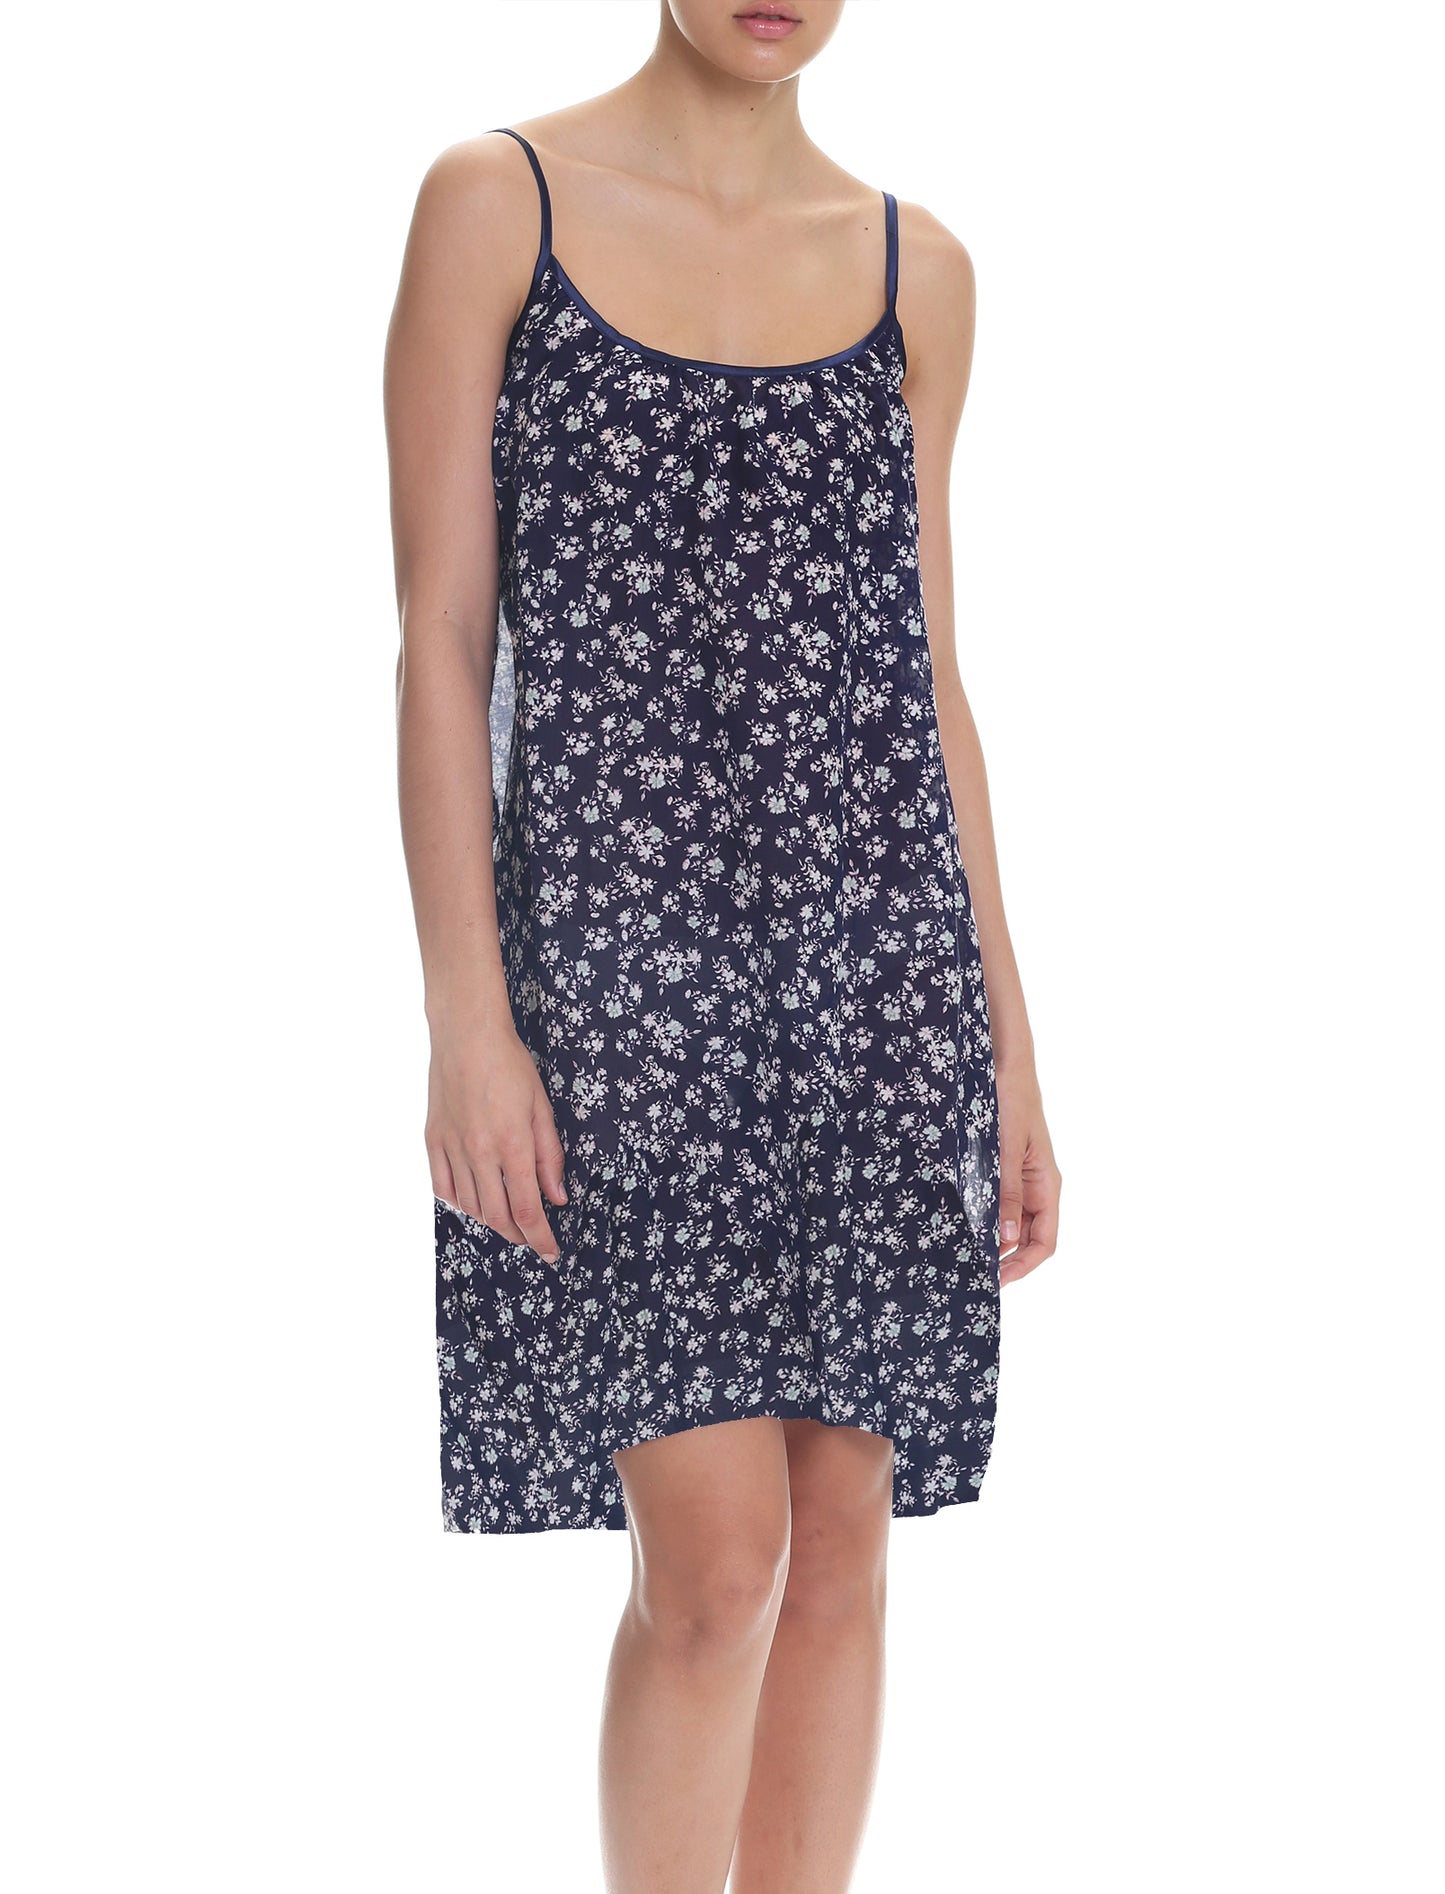 Potager Navy Cotton Strappy Nightgown